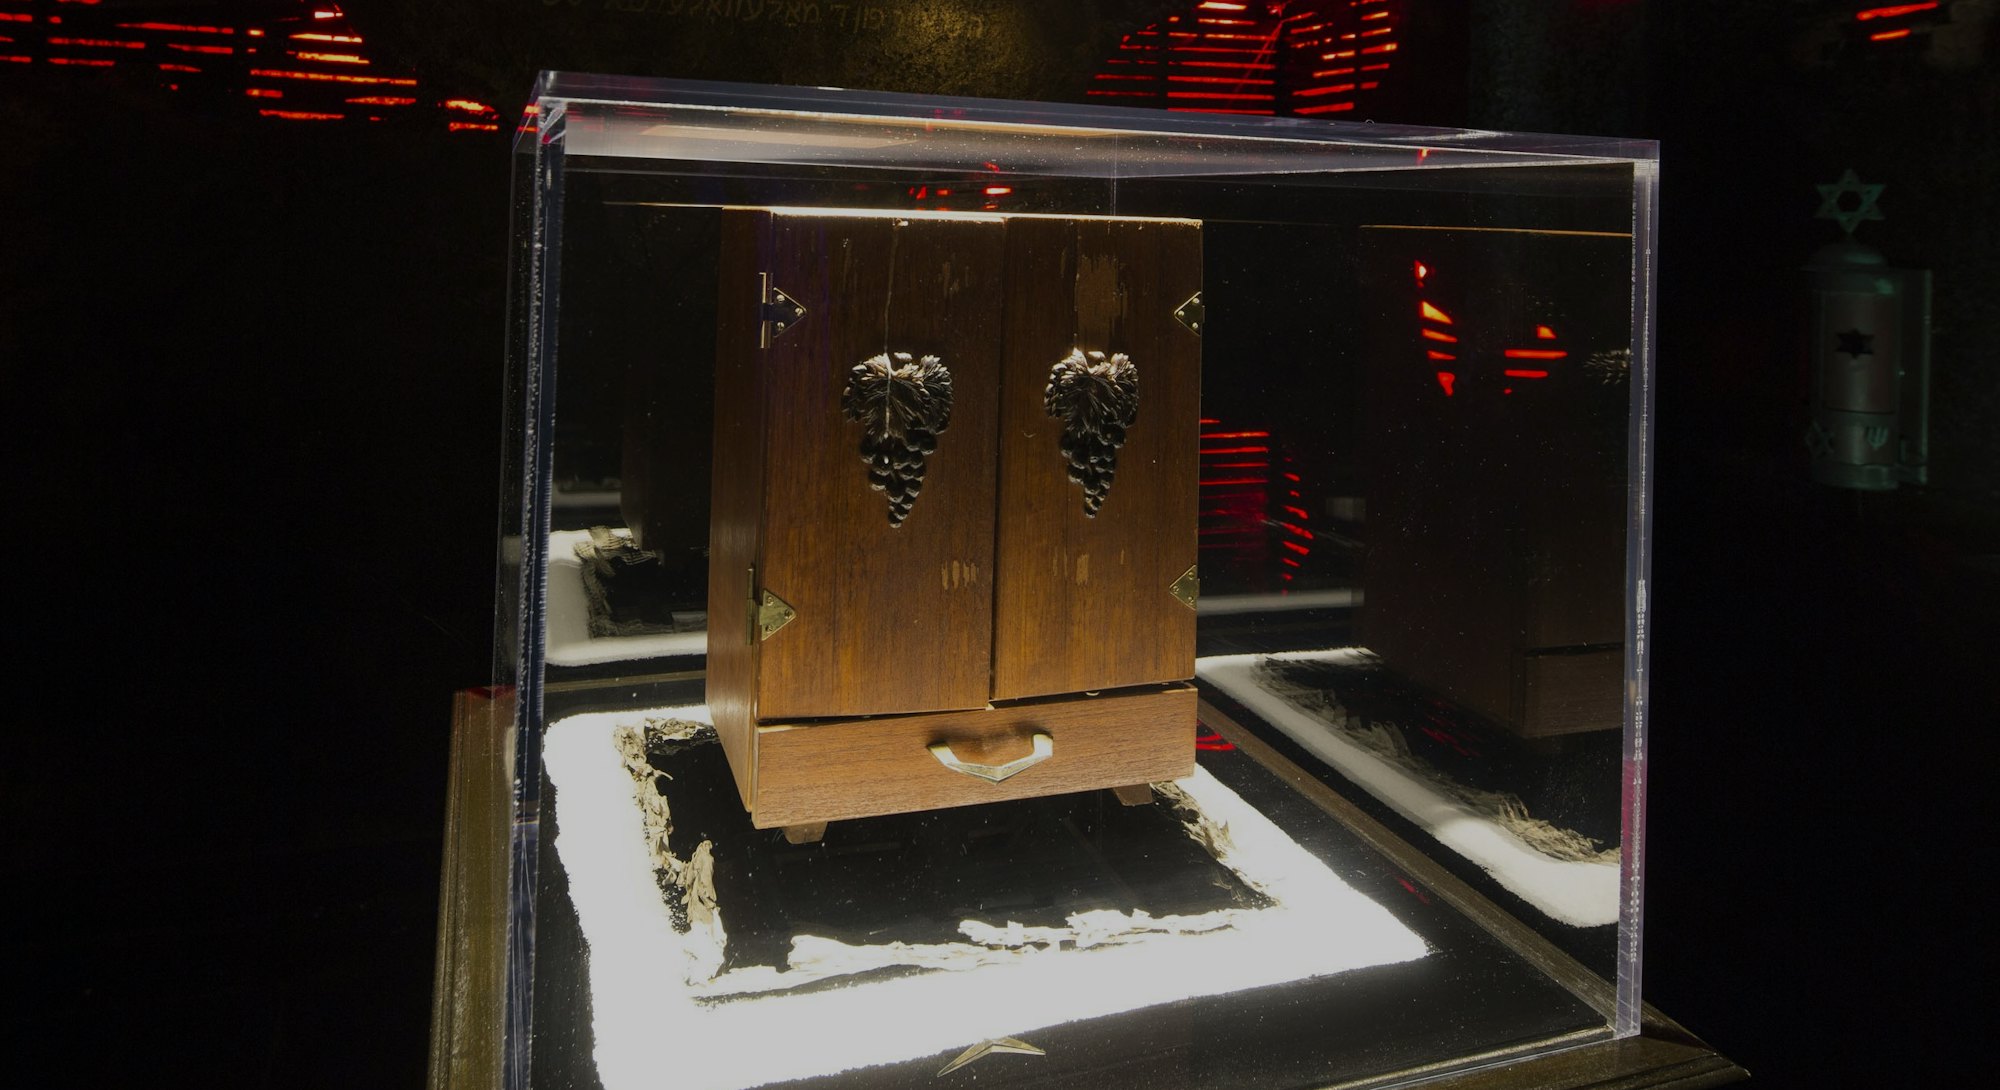 The Dybbuk Box on display at the Haunted Museum in Las Vegas